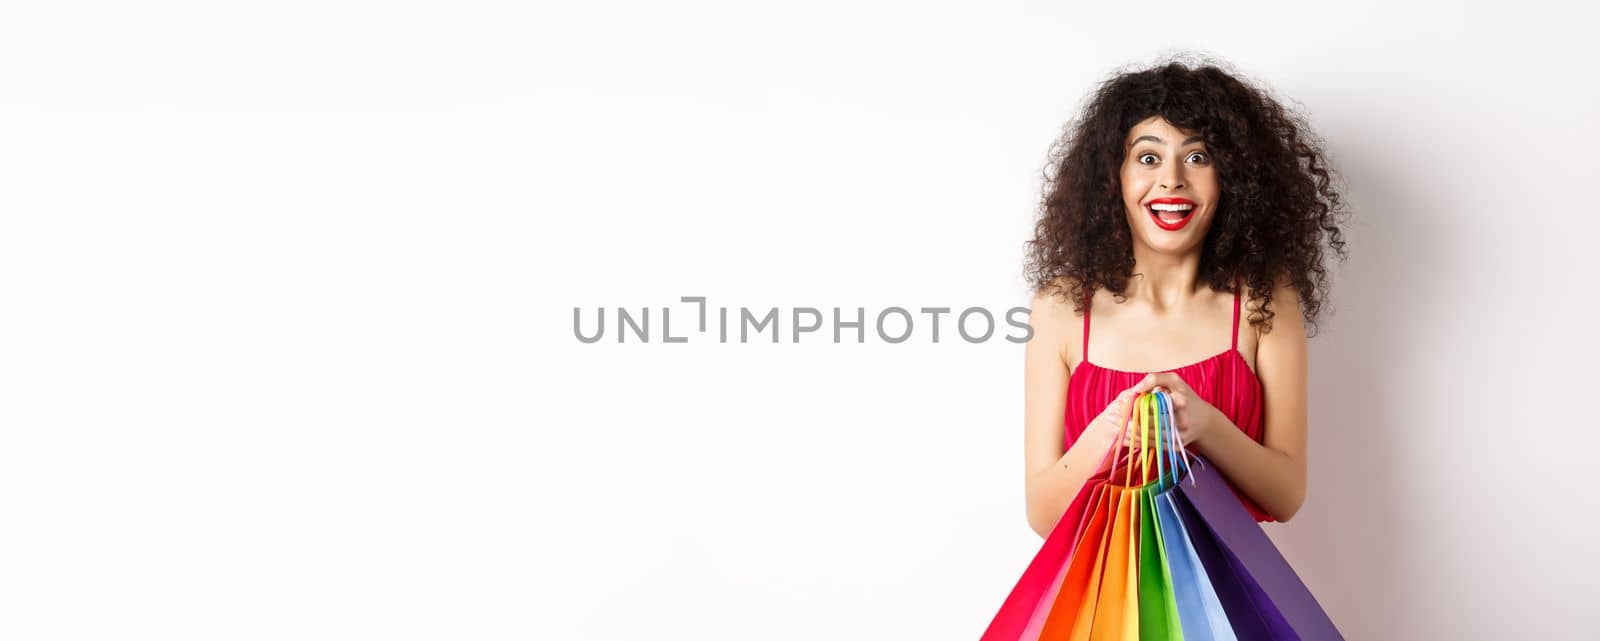 Cheerful young woman in stylish red dress, holding shopping bags and smiling, buying during promo offers, standing over white background.